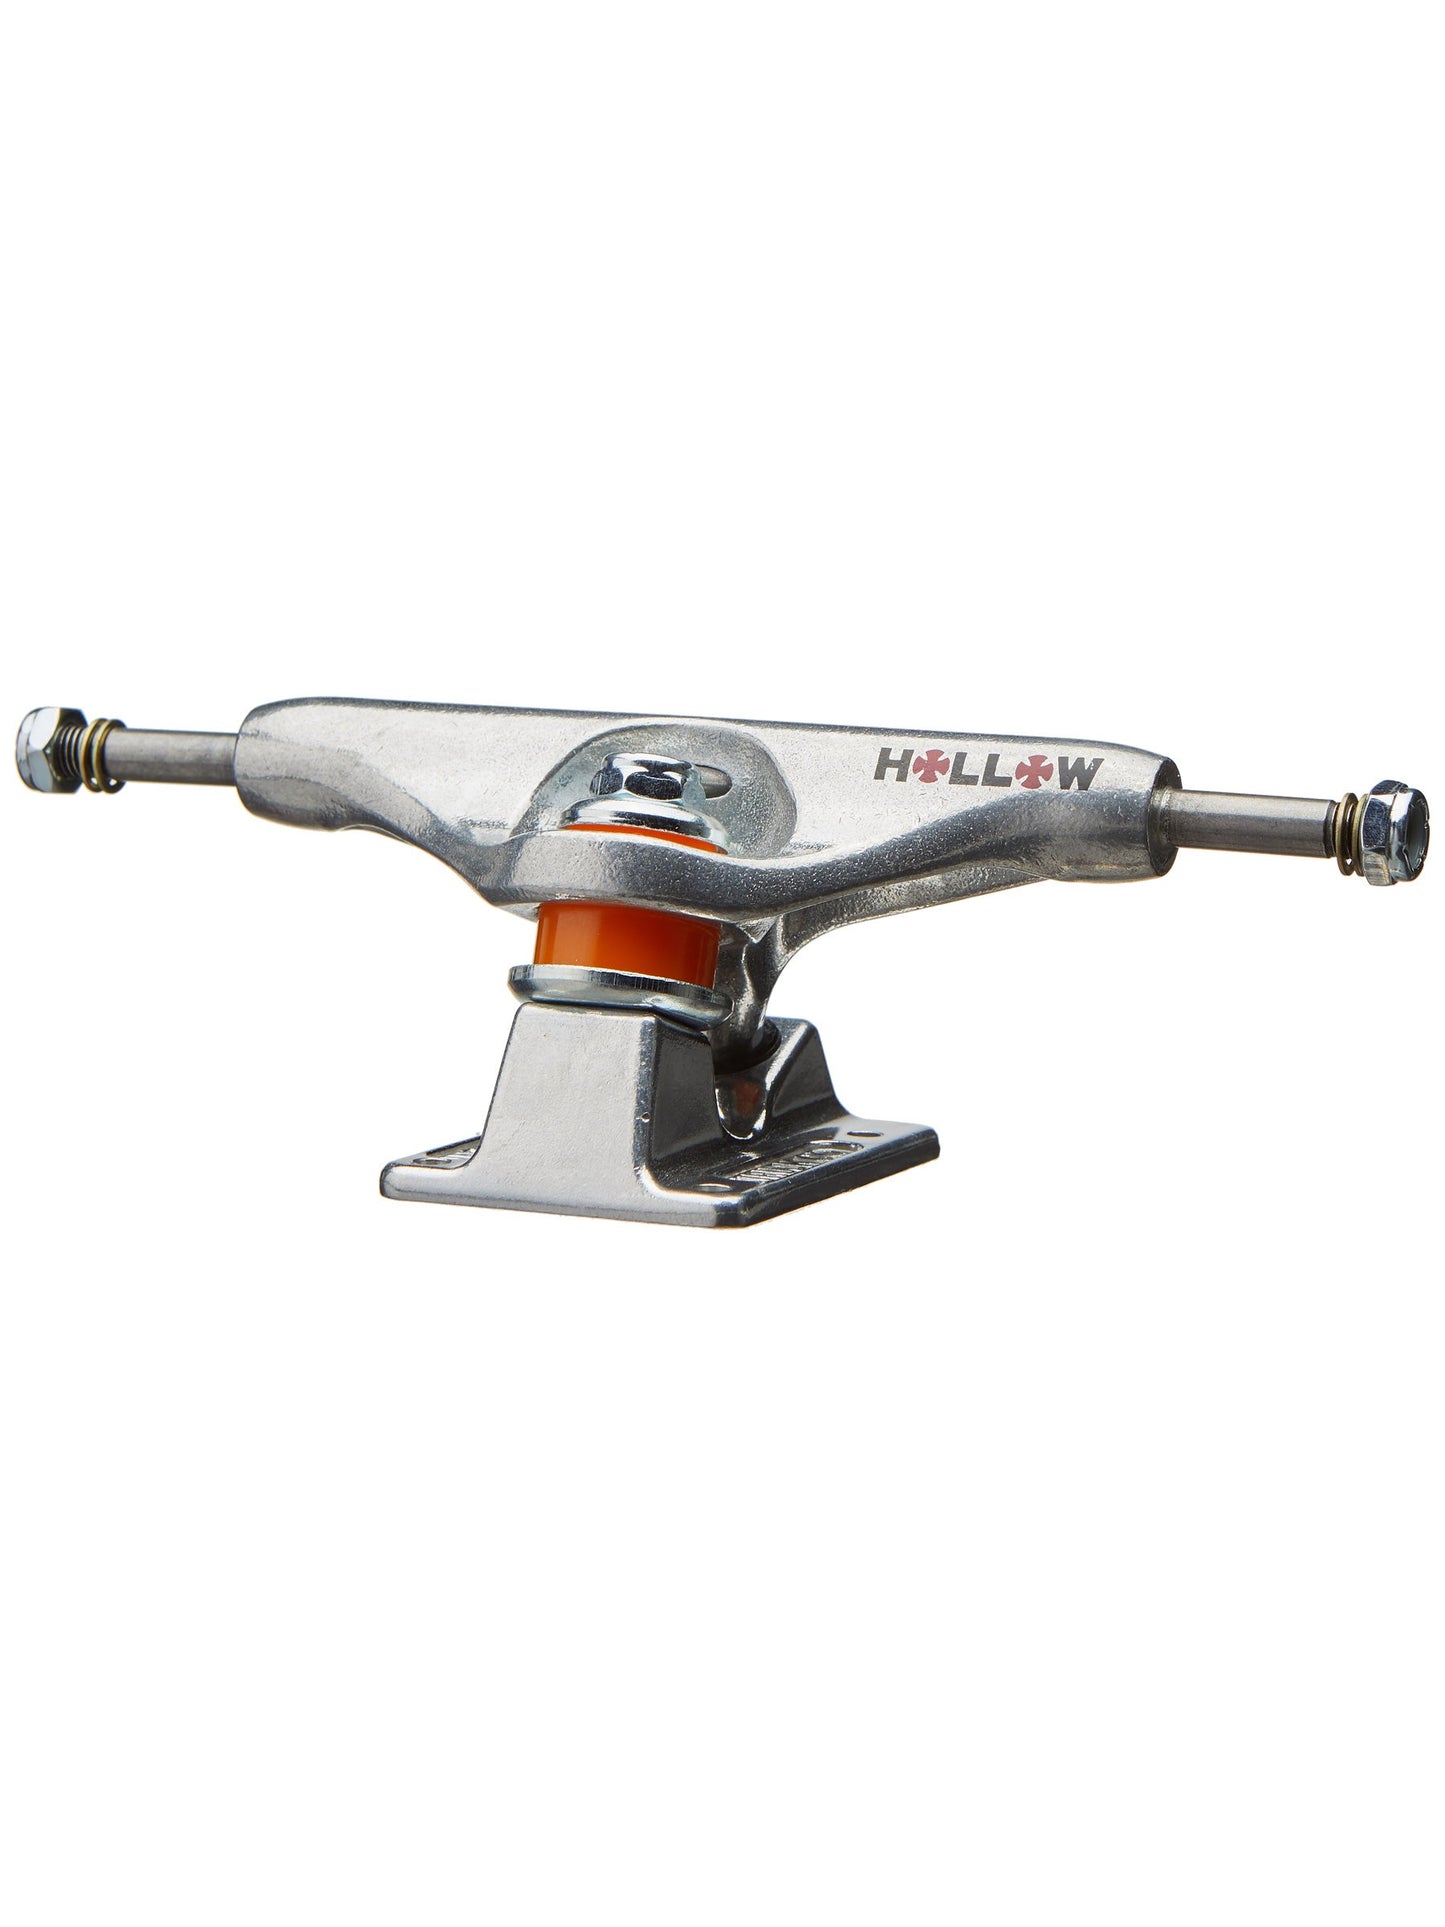 INDEPENDENT Stage 11 Forged Hollow Silver Standard Trucks